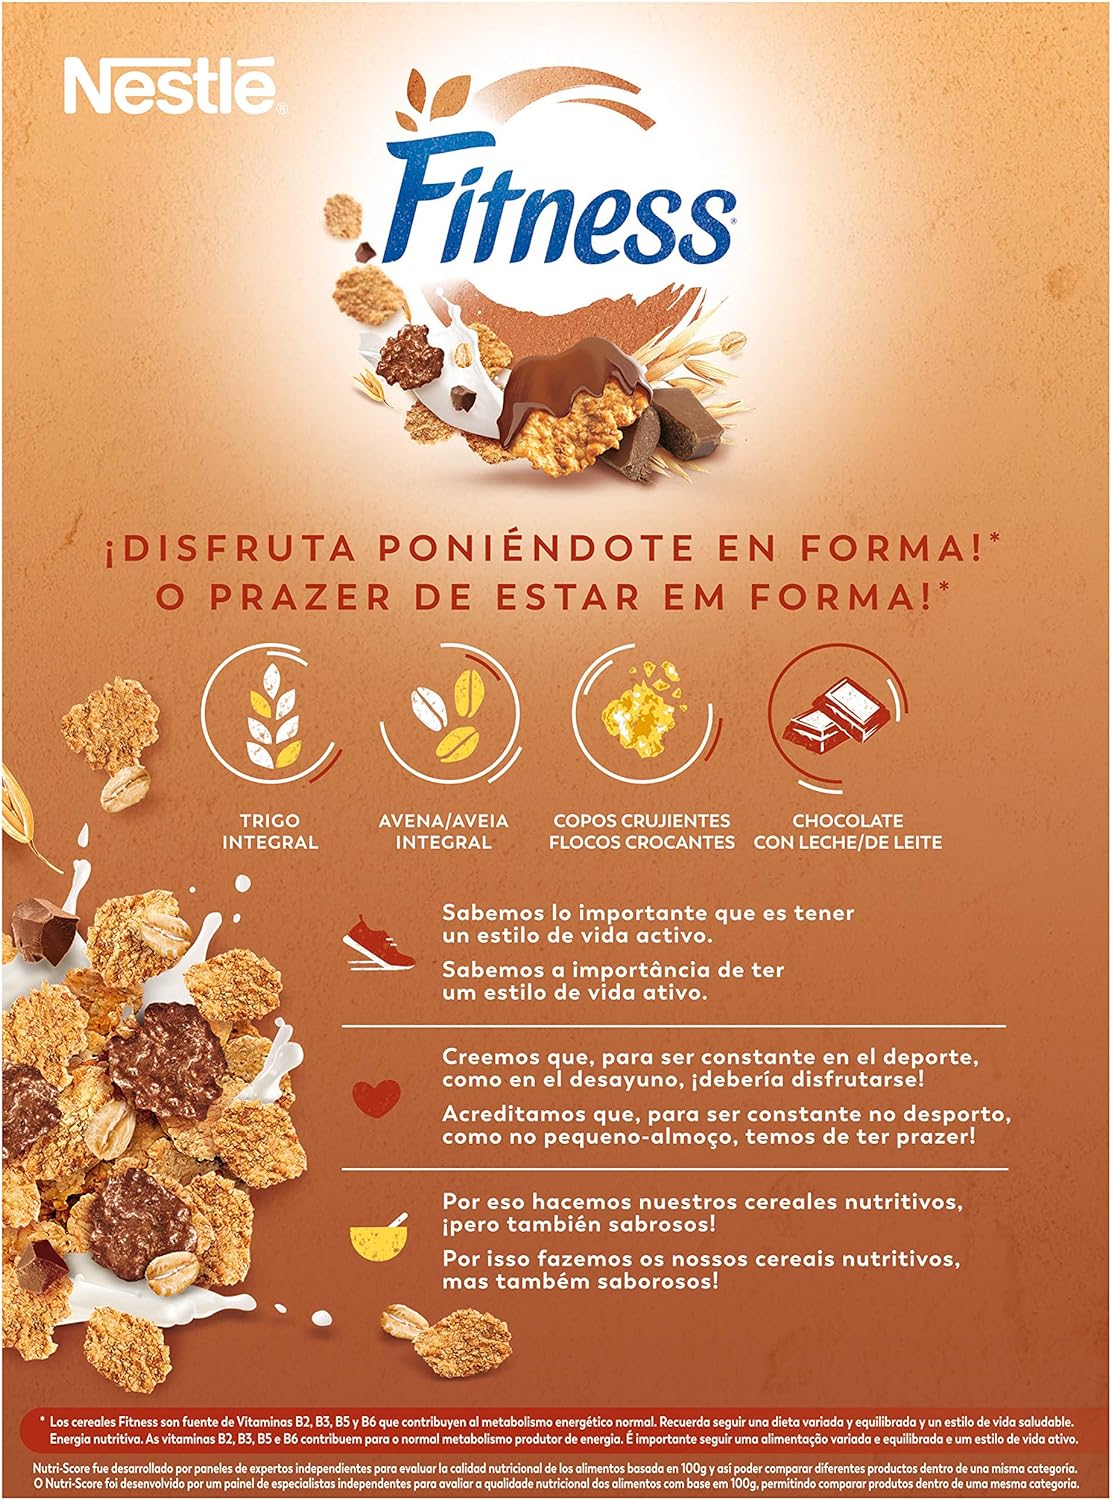 Nestle Fitness Chocolate Breakfast Cereal Pack 375g